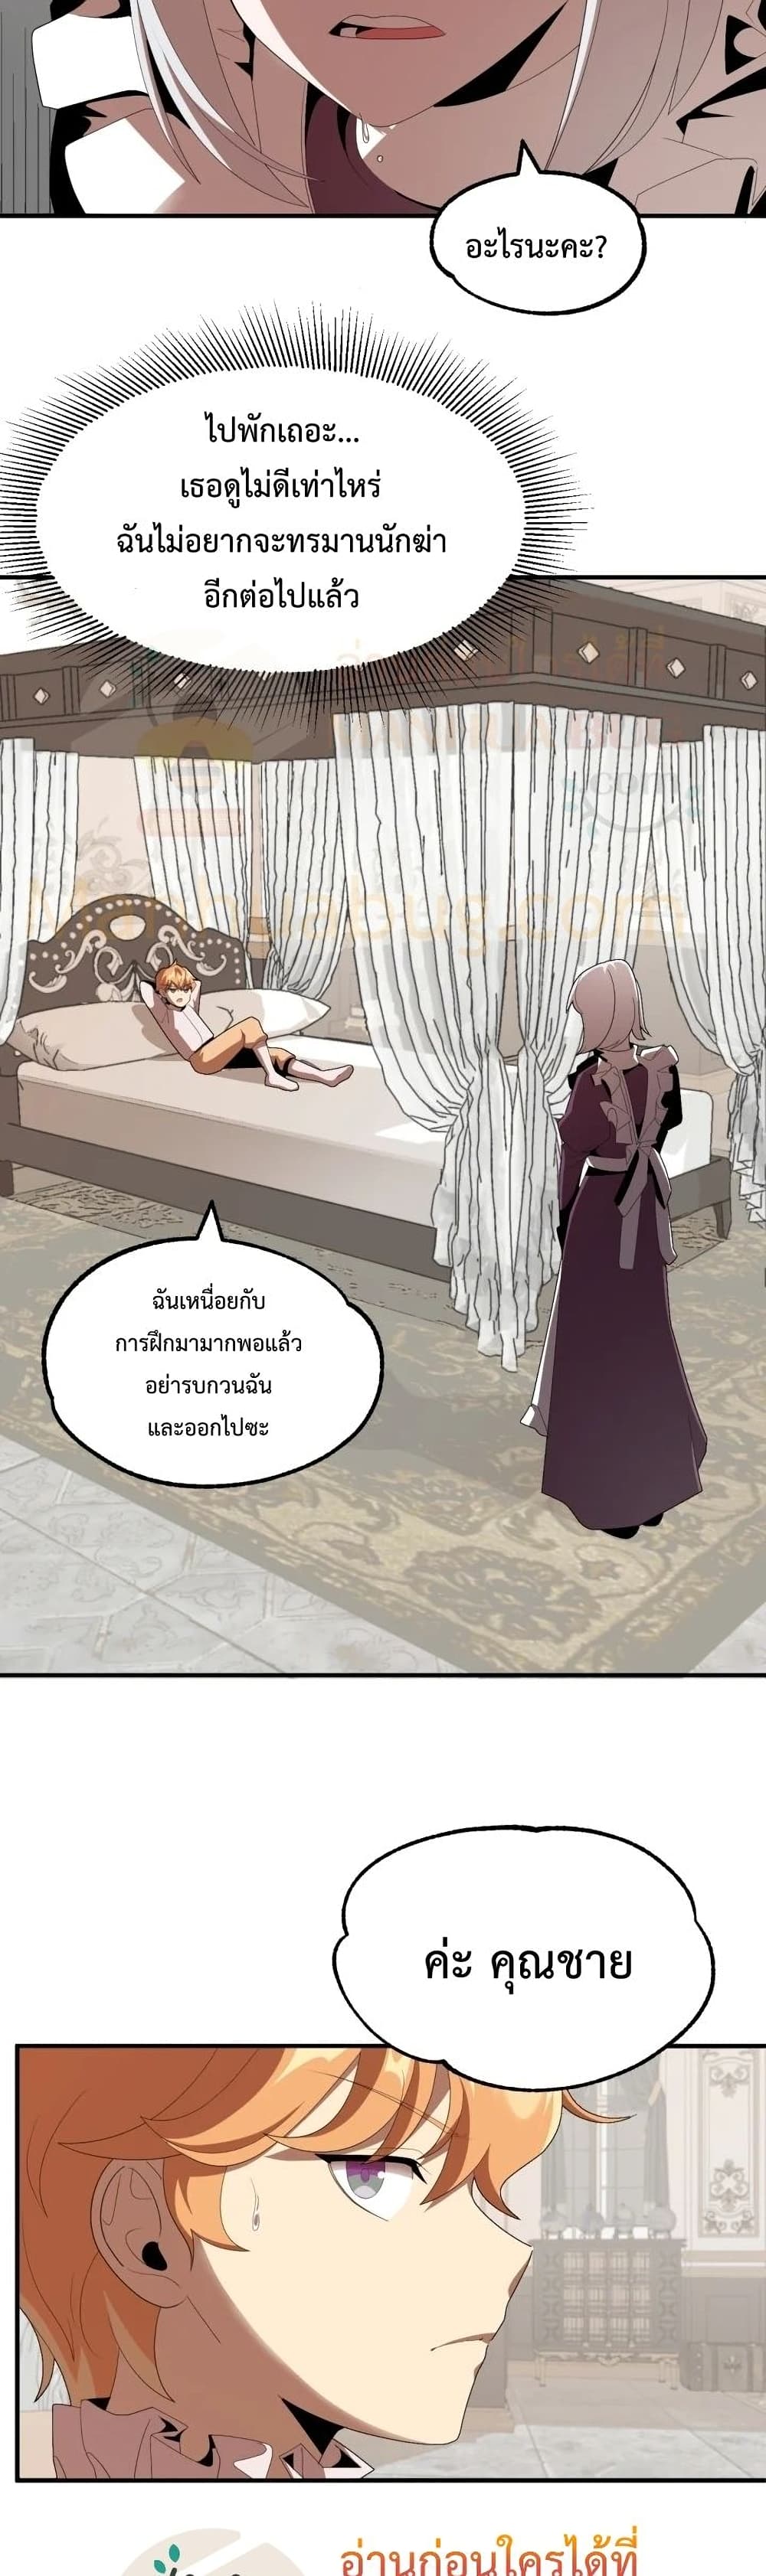 Youngest Scion of the Mages ตอนที่ 5 (4)